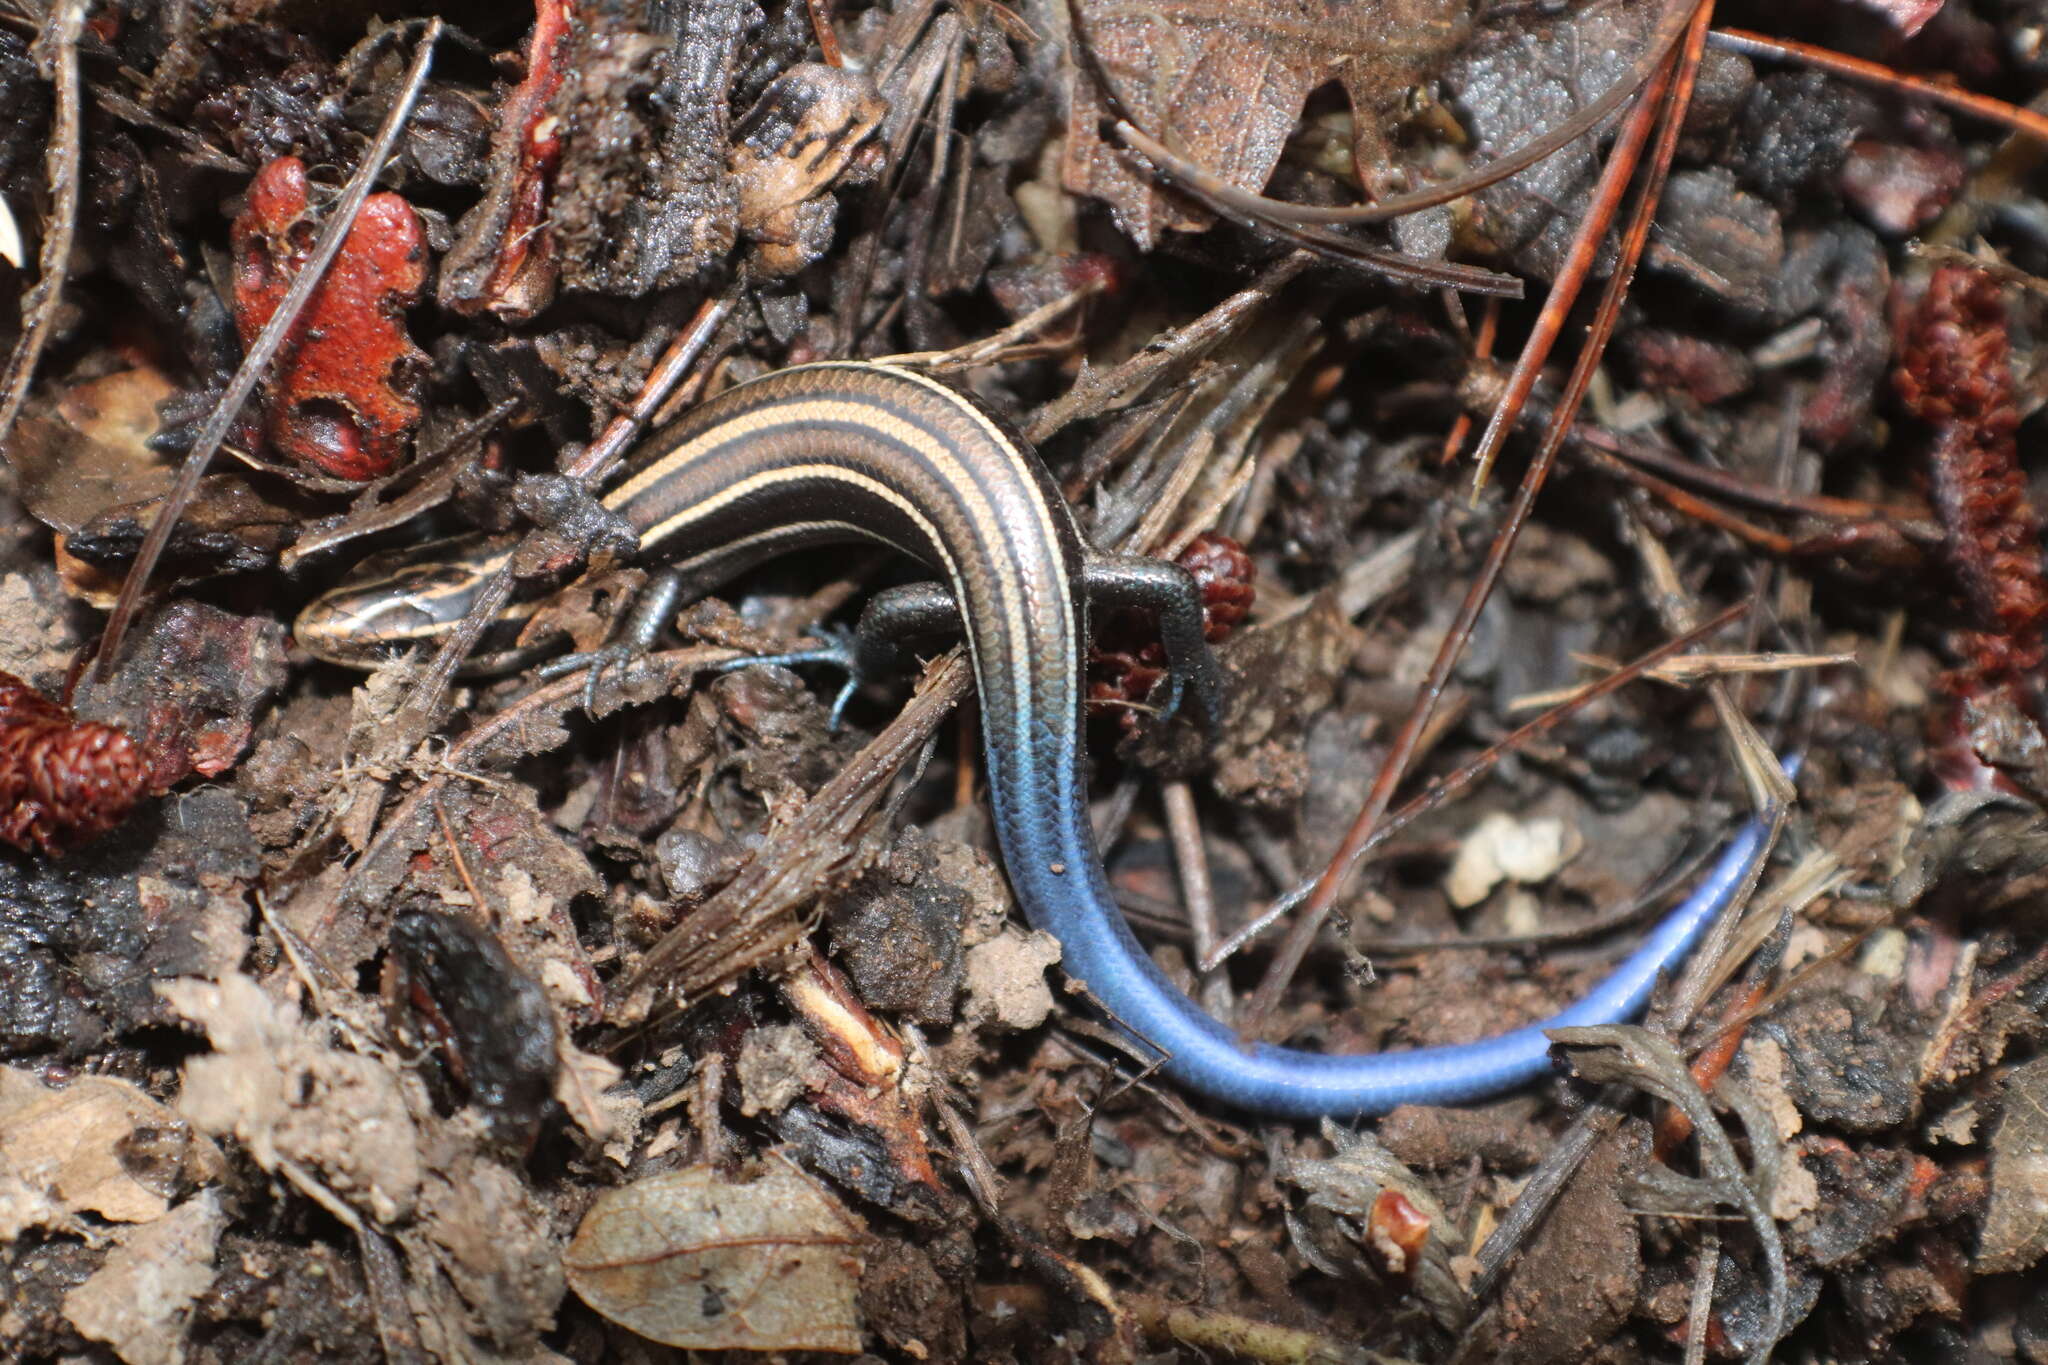 Image of Chihuahuan Skink